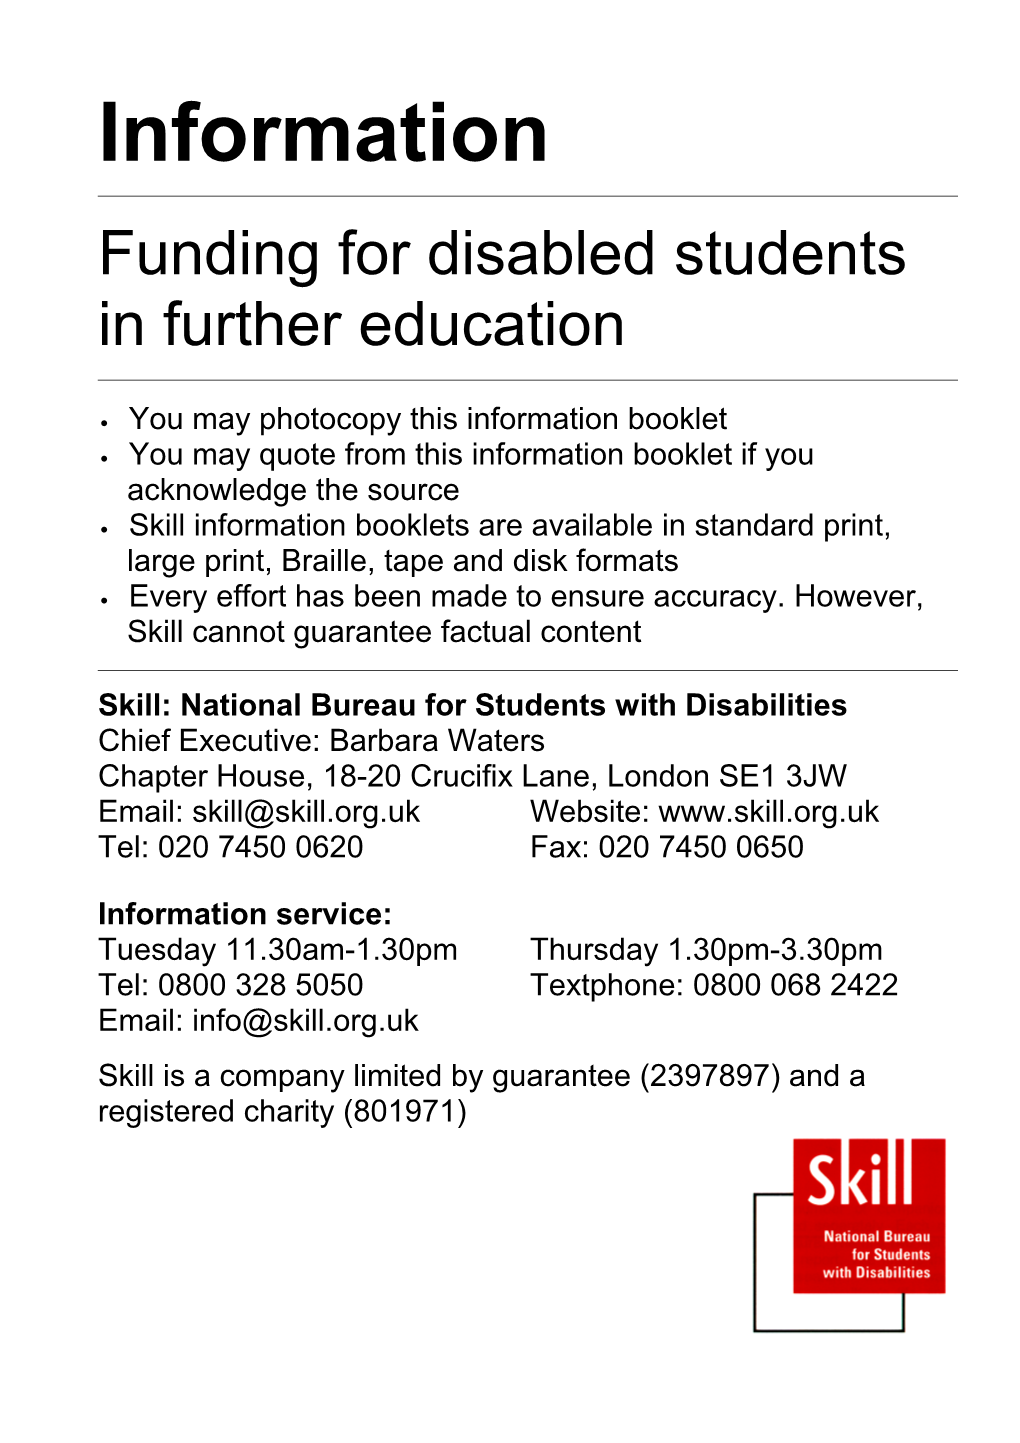 6. Funding for Students with Disabilities in Further Education